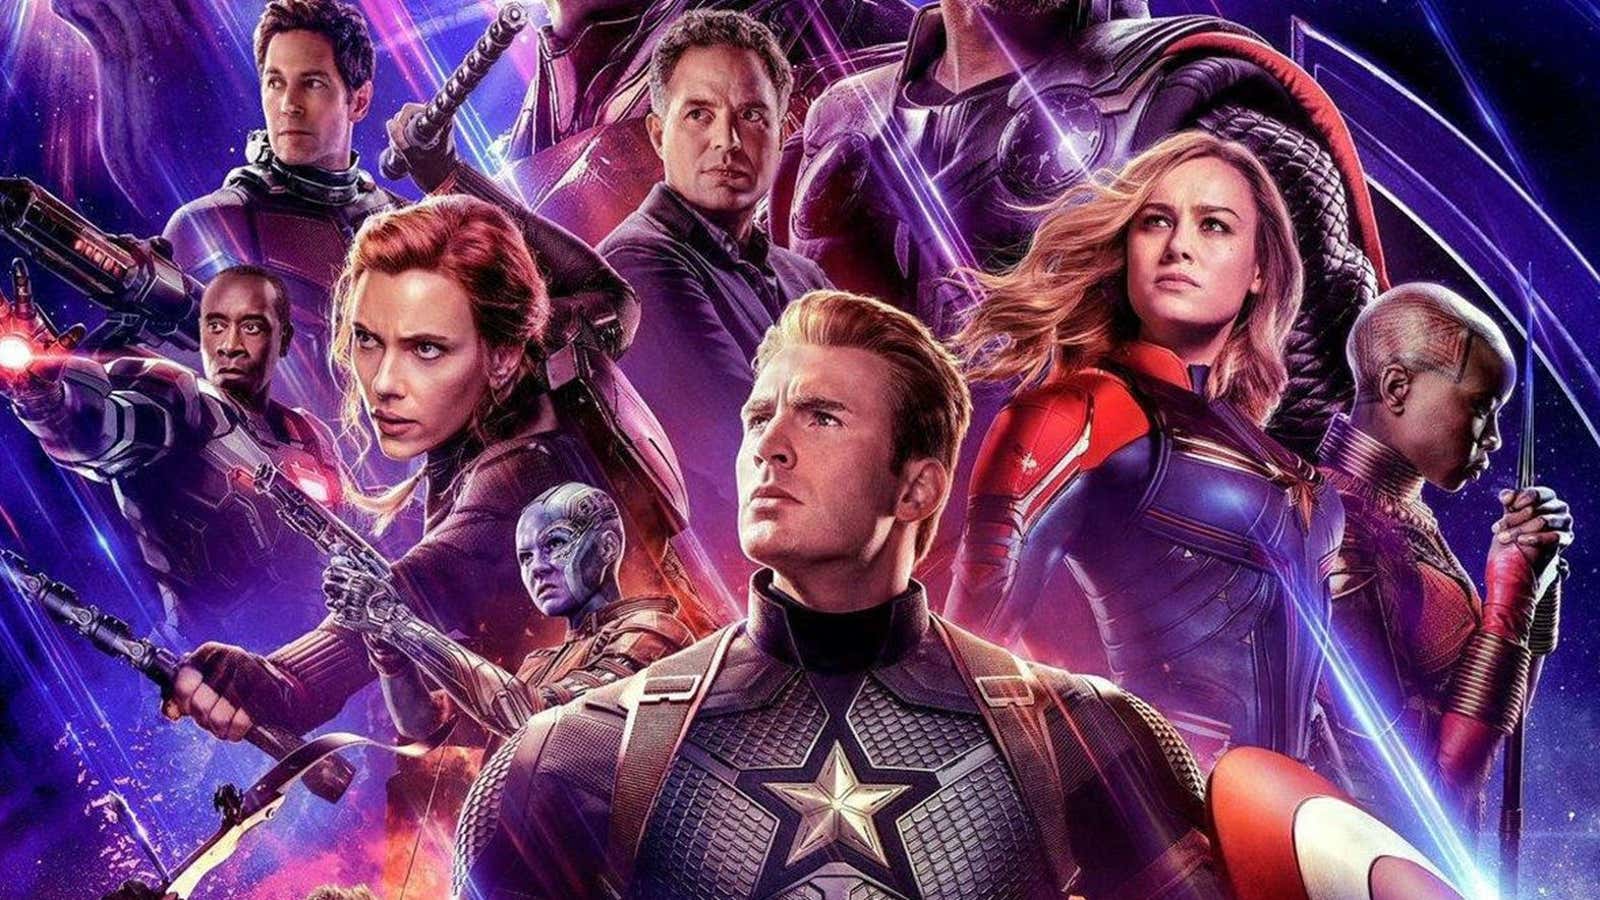 Avengers: Endgame: Marvel movies ranked, with plot points and